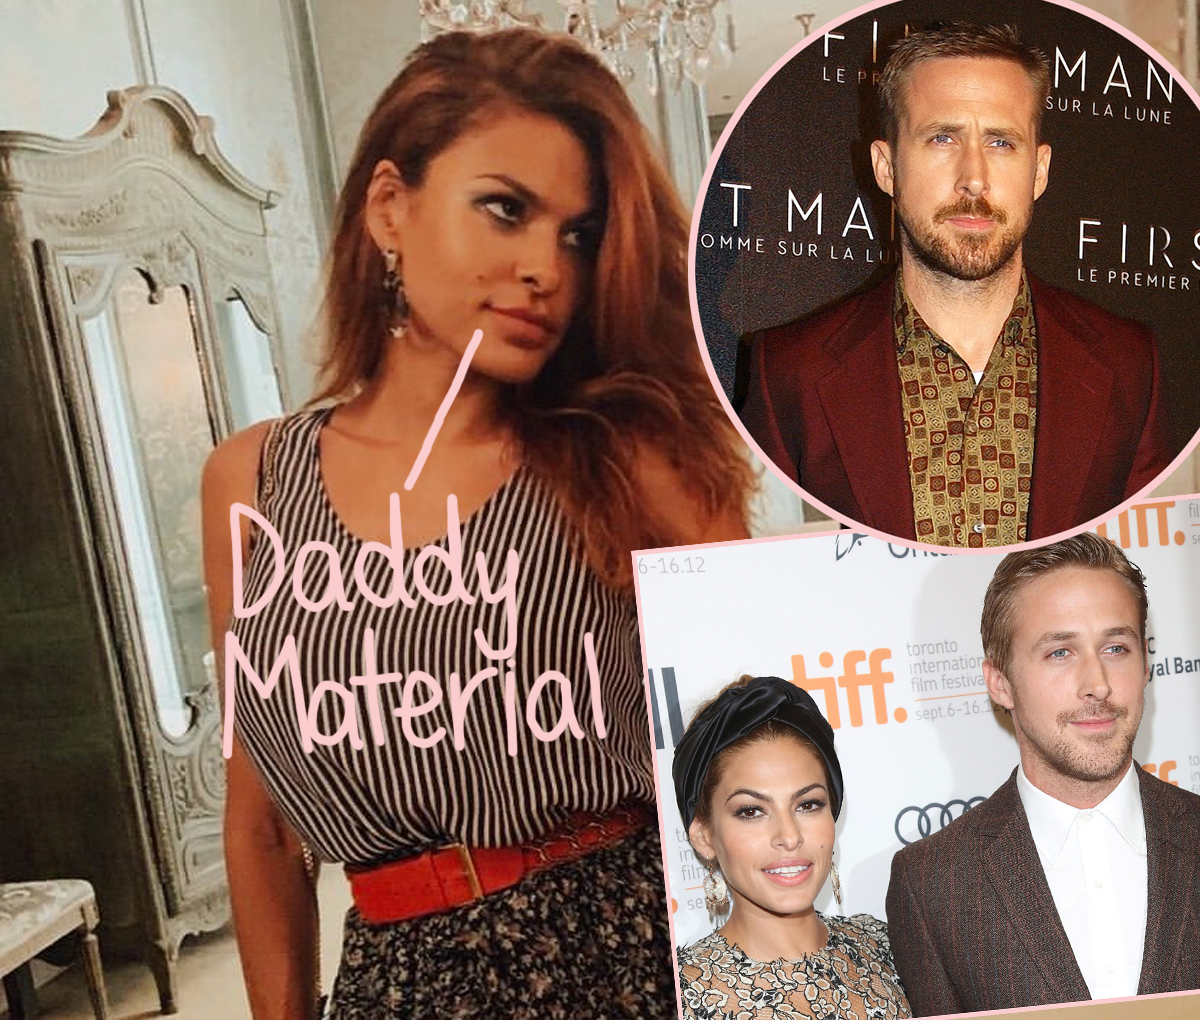 #Eva Mendes & Ryan Gosling Kick Gender Roles To The Curb When It Comes To Parenting!